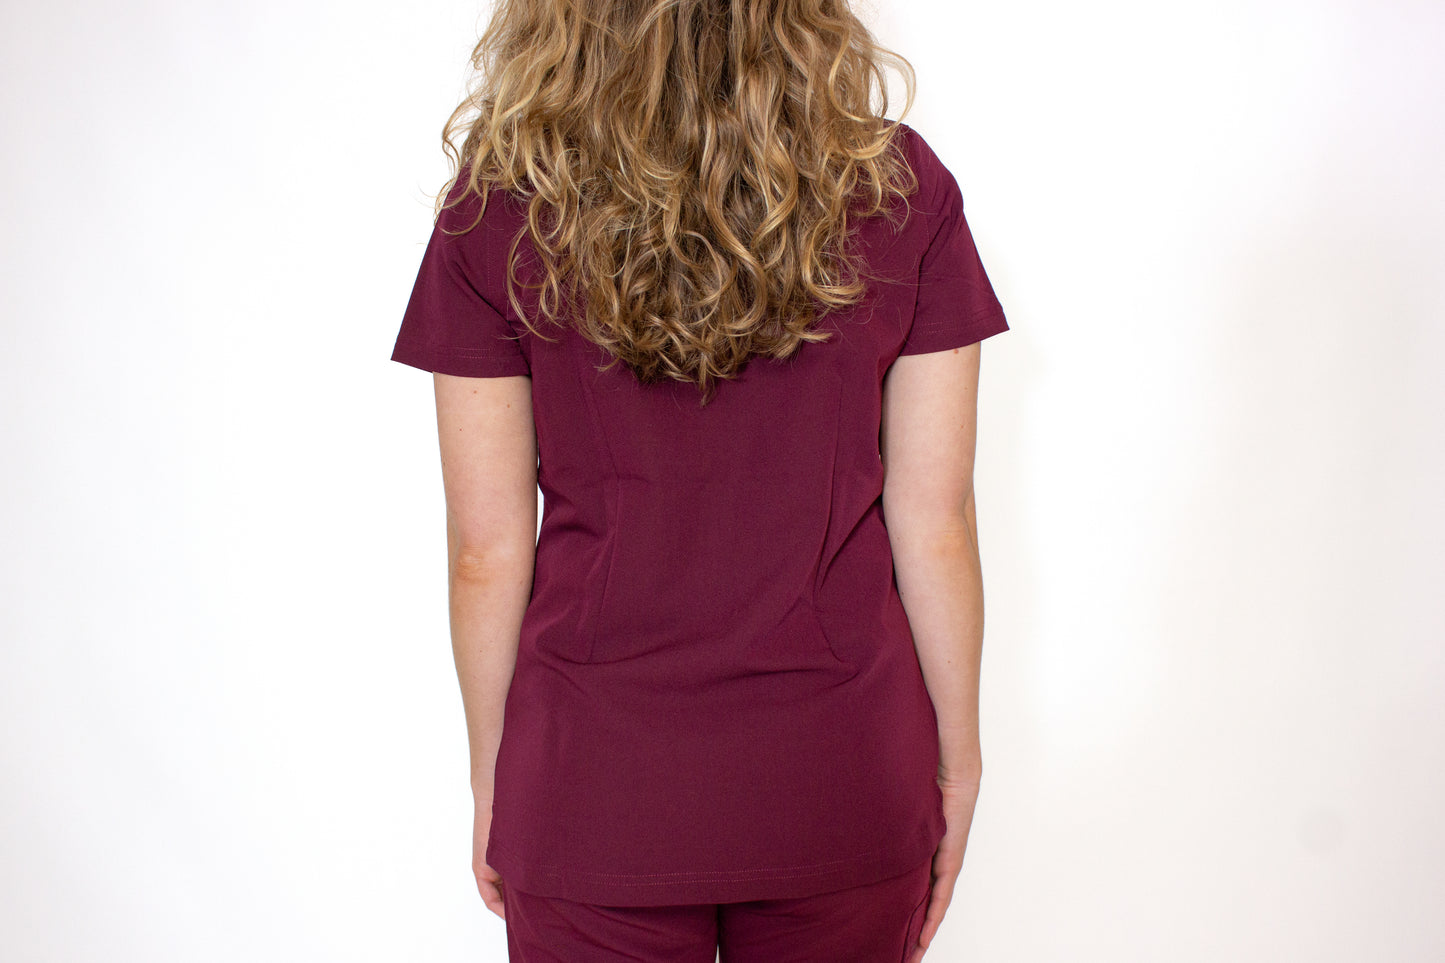 Rear view of a crimson PAX scrub top on a female with curly hair.